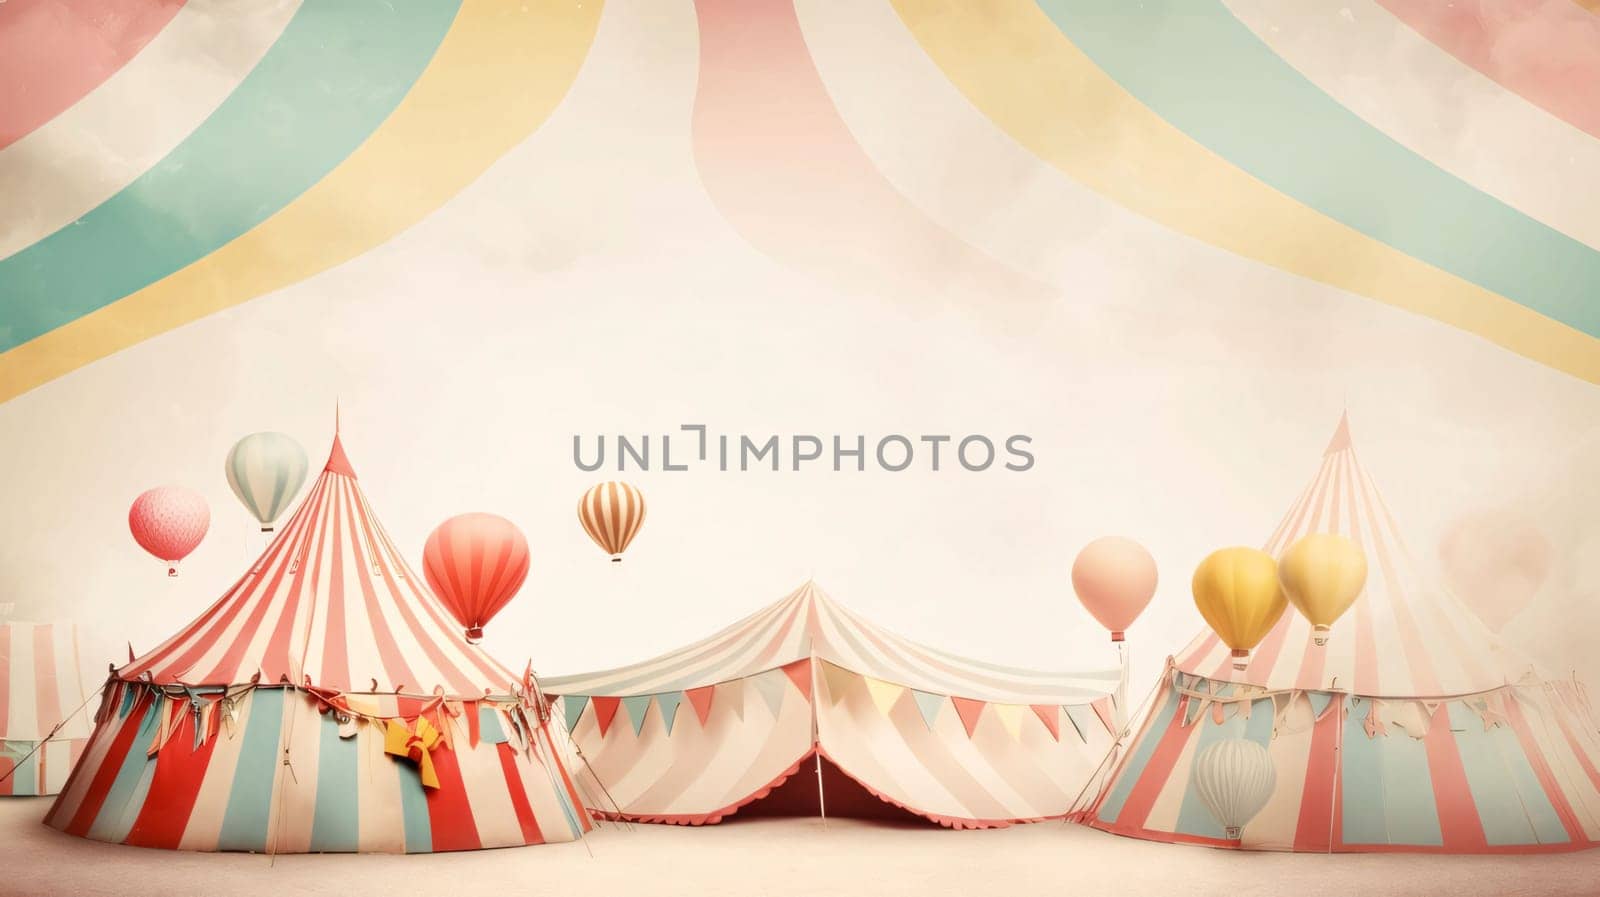 Circus tent with colorful balloons and ribbons on grunge background by ThemesS